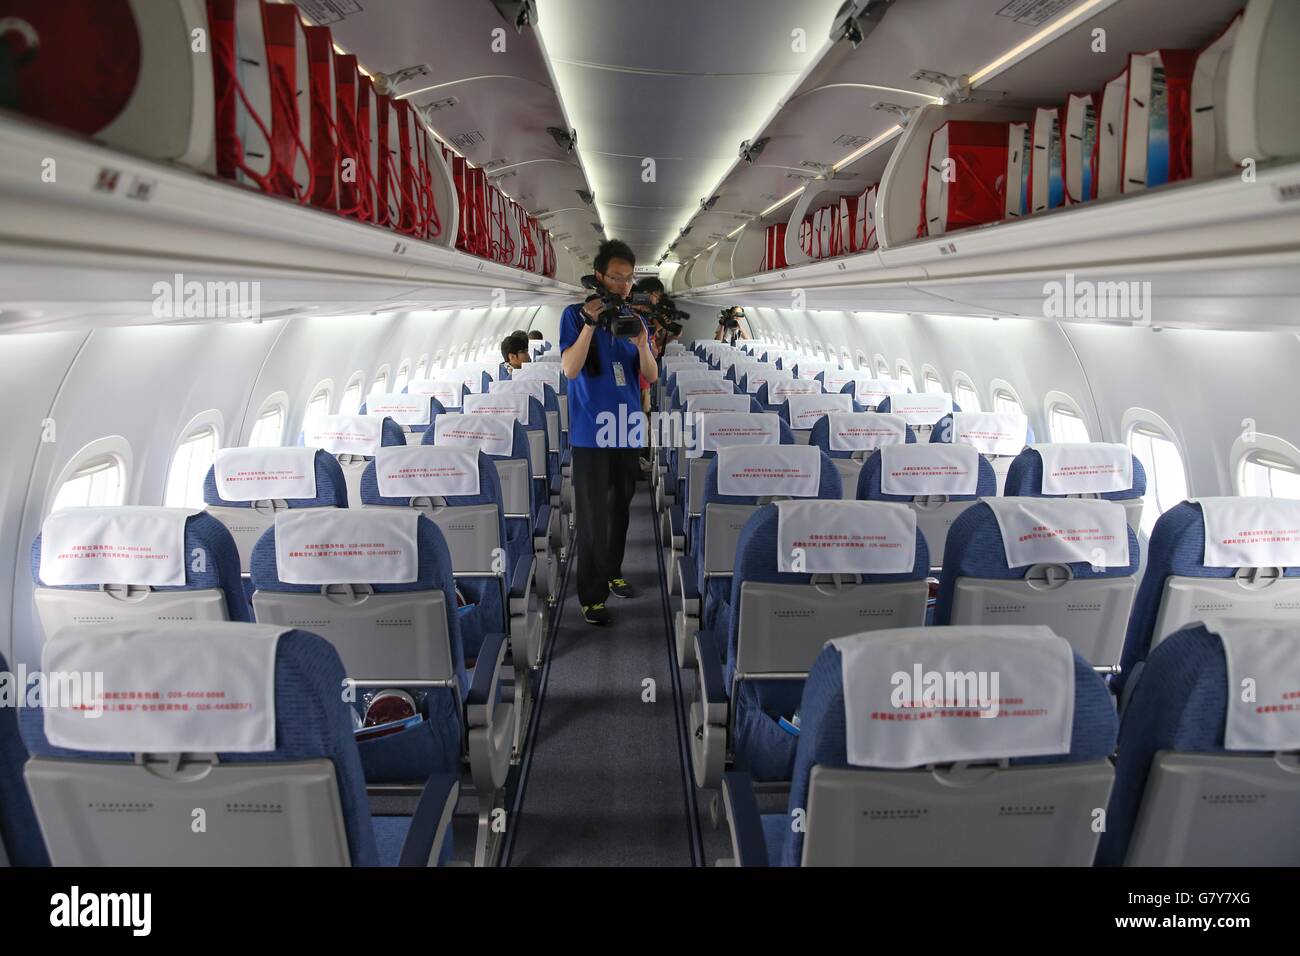 Chengdu, China's Sichuan Province. 28th June, 2016. Reporters work inside Chengdu Airlines ARJ21-700 at Shuangliu International Airport in Chengdu, capital of southwest China's Sichuan Province, June 28, 2016. ARJ21, manufactured by the Commercial Aircraft Corp. of China (COMAC), made its maiden commercial flight from Chengdu to Shanghai Tuesday. The domestically-designed airliner is China's first regional jet manufactured according to international standards. © Liu Kun/Xinhua/Alamy Live News Stock Photo